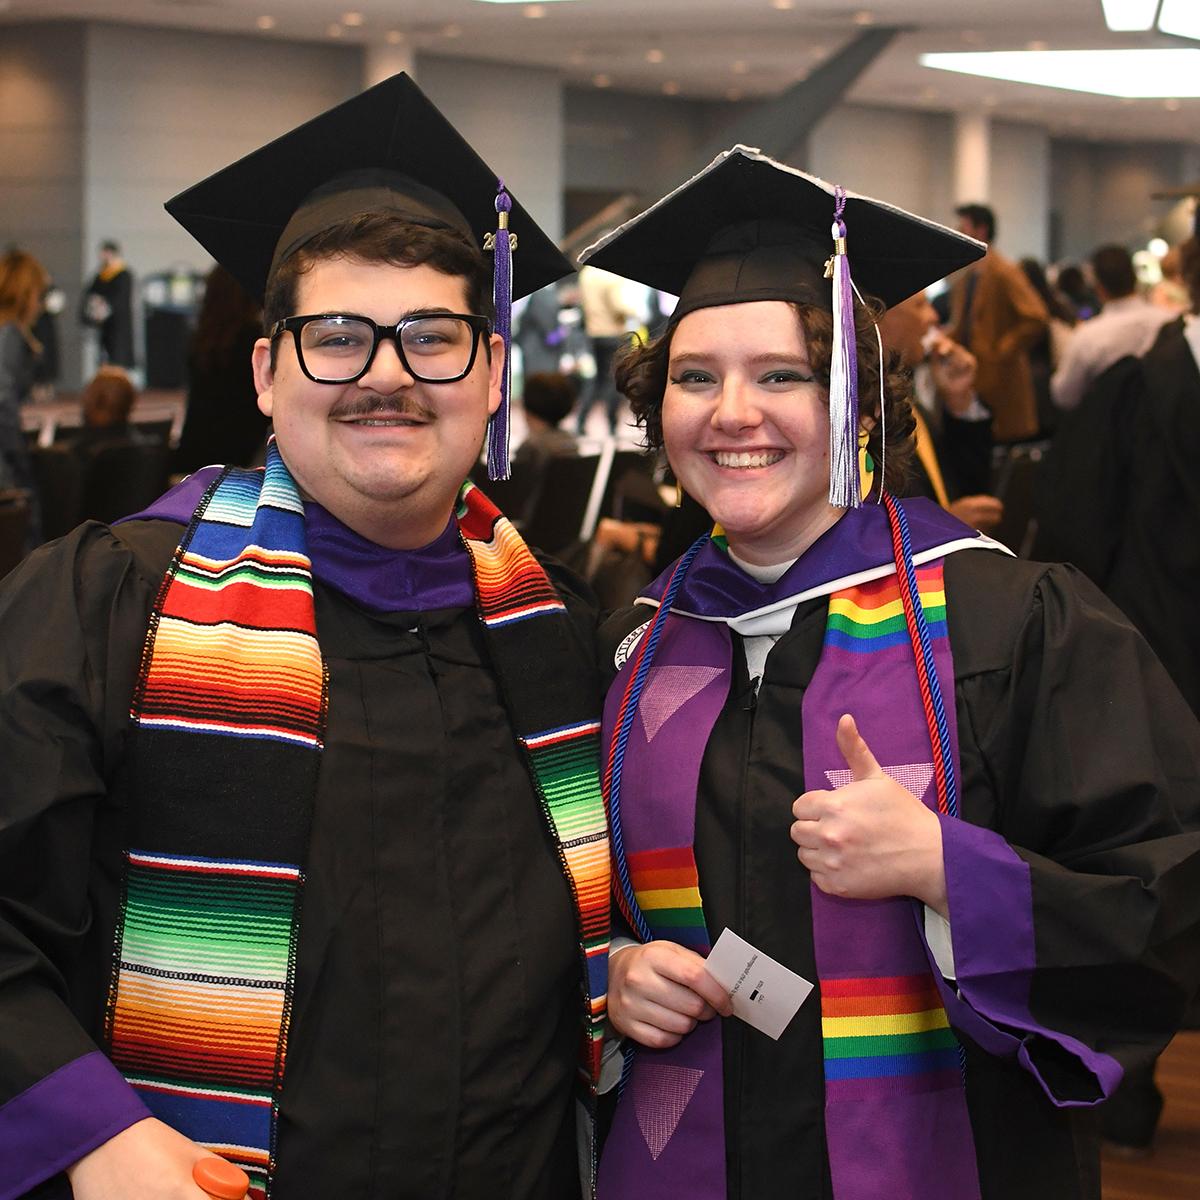 Two graduating students in caps and gowns pose for a photo, smiling